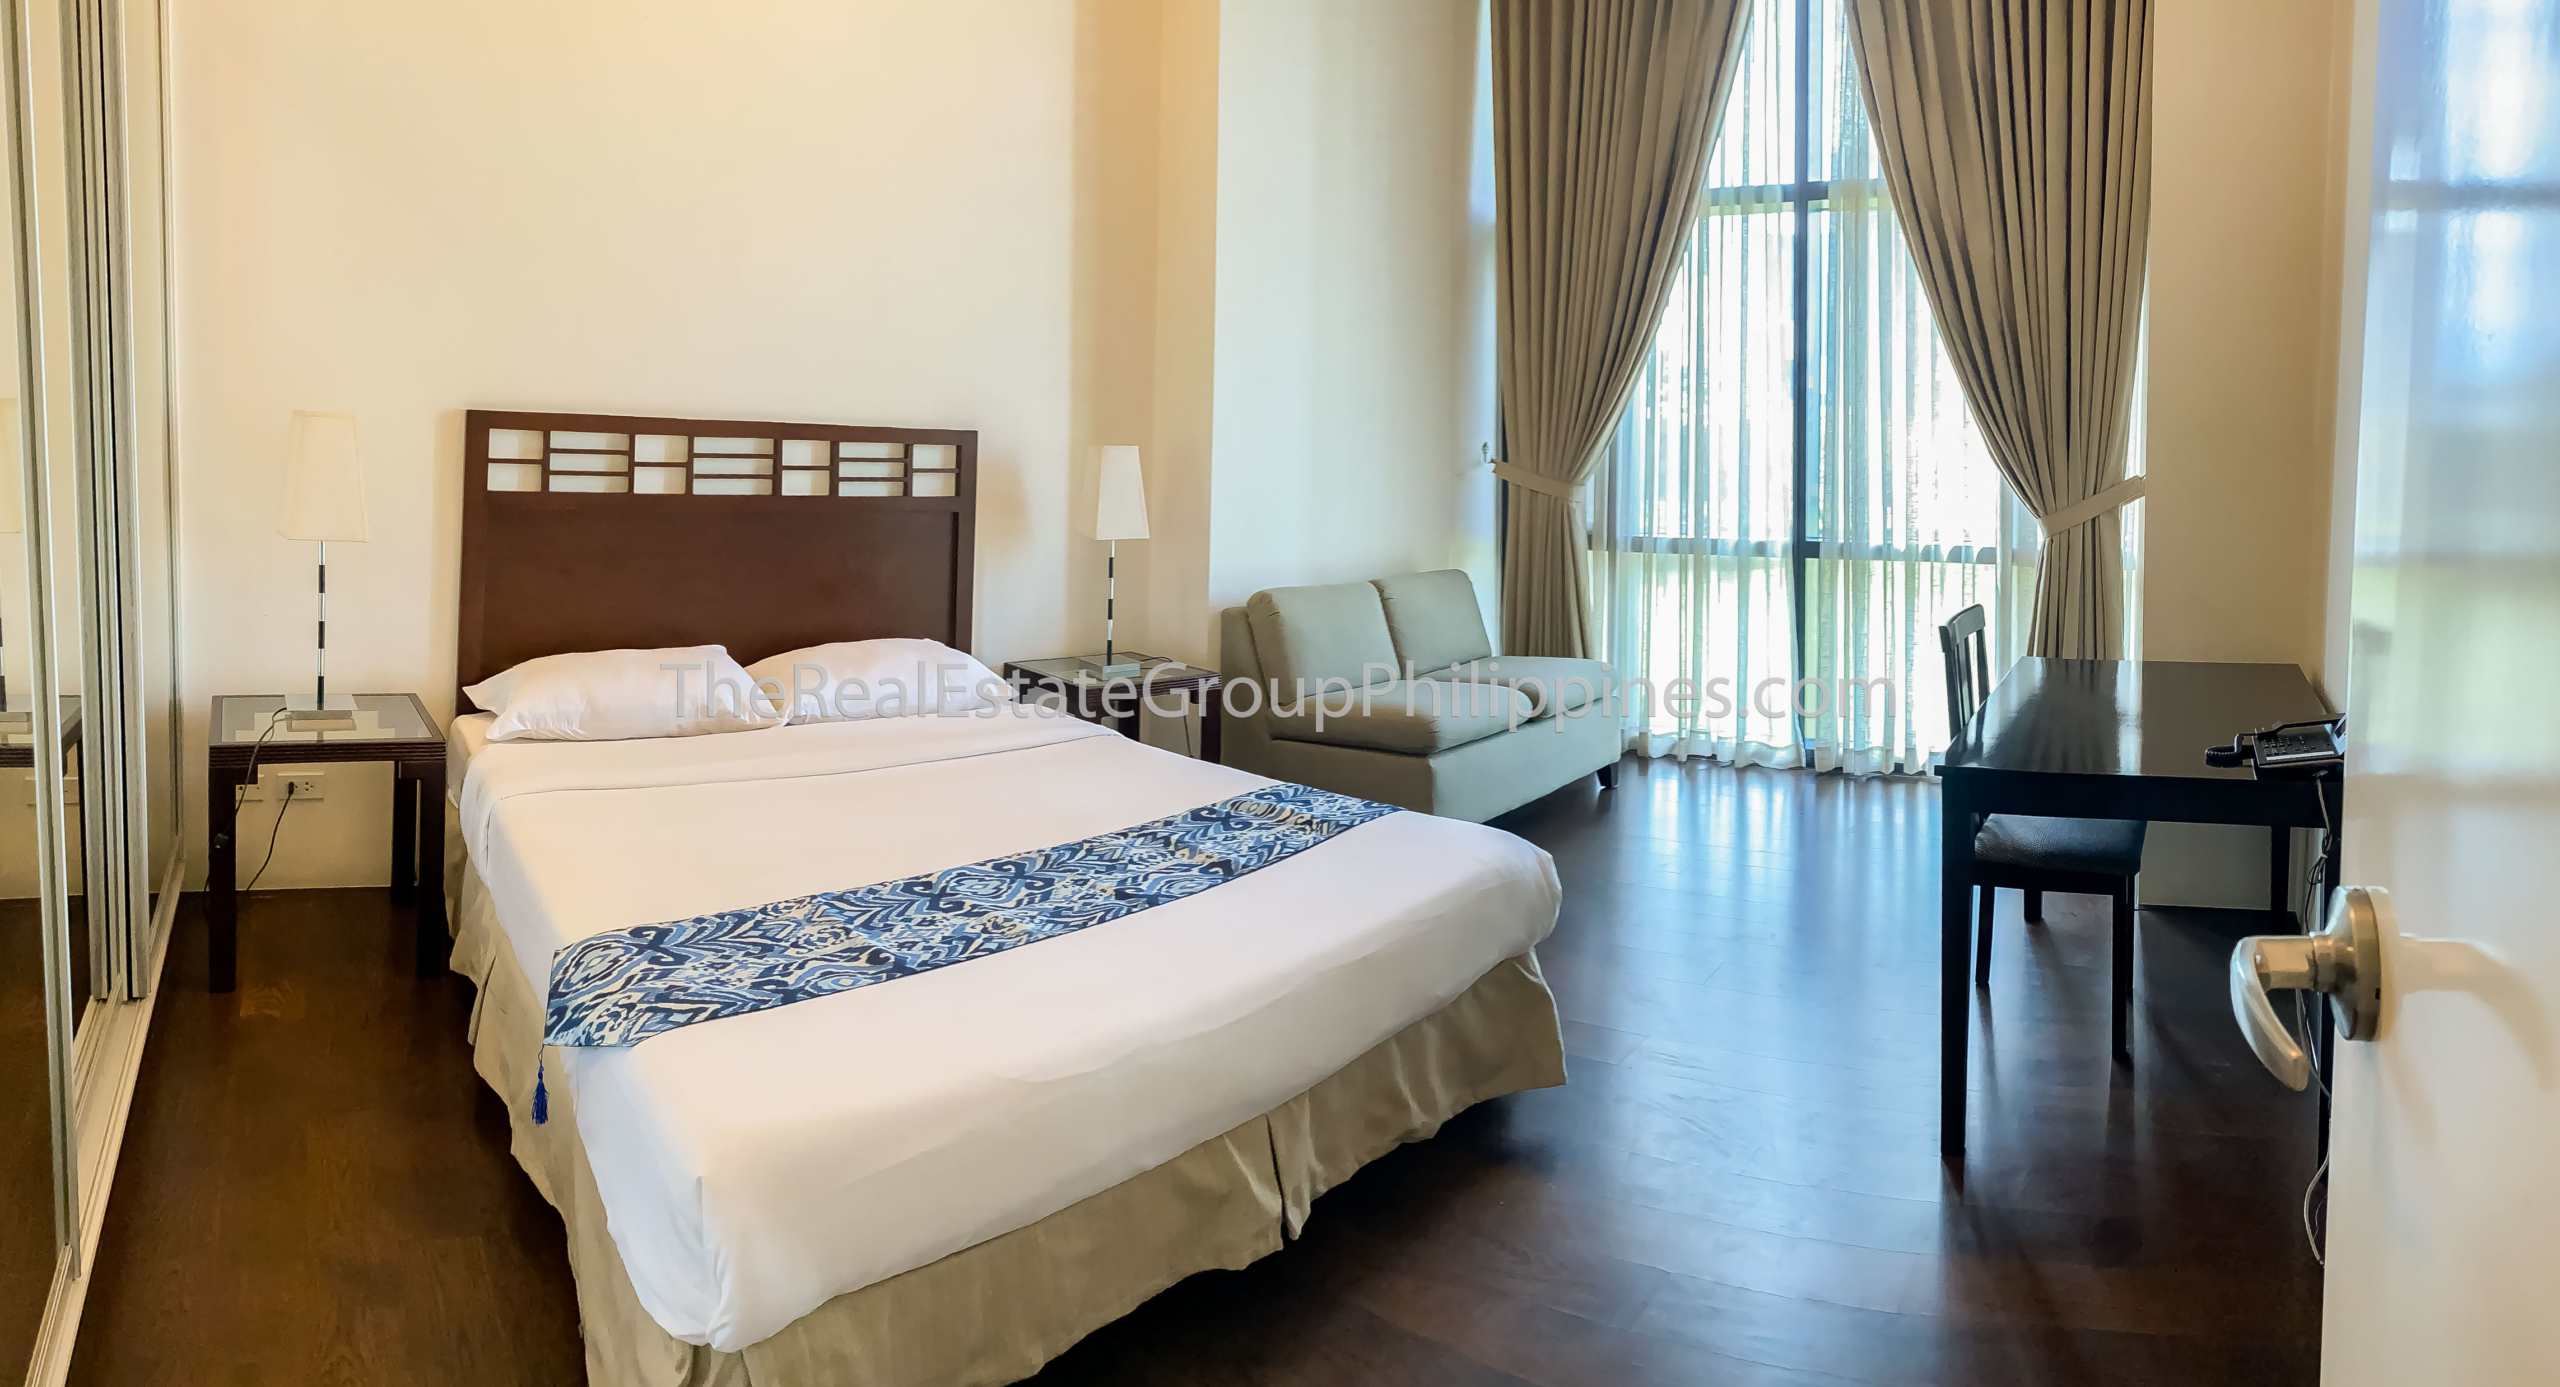 1BR Condo For Rent, Arya Residences, Tower 1, BGC - ₱75K Per Month-10